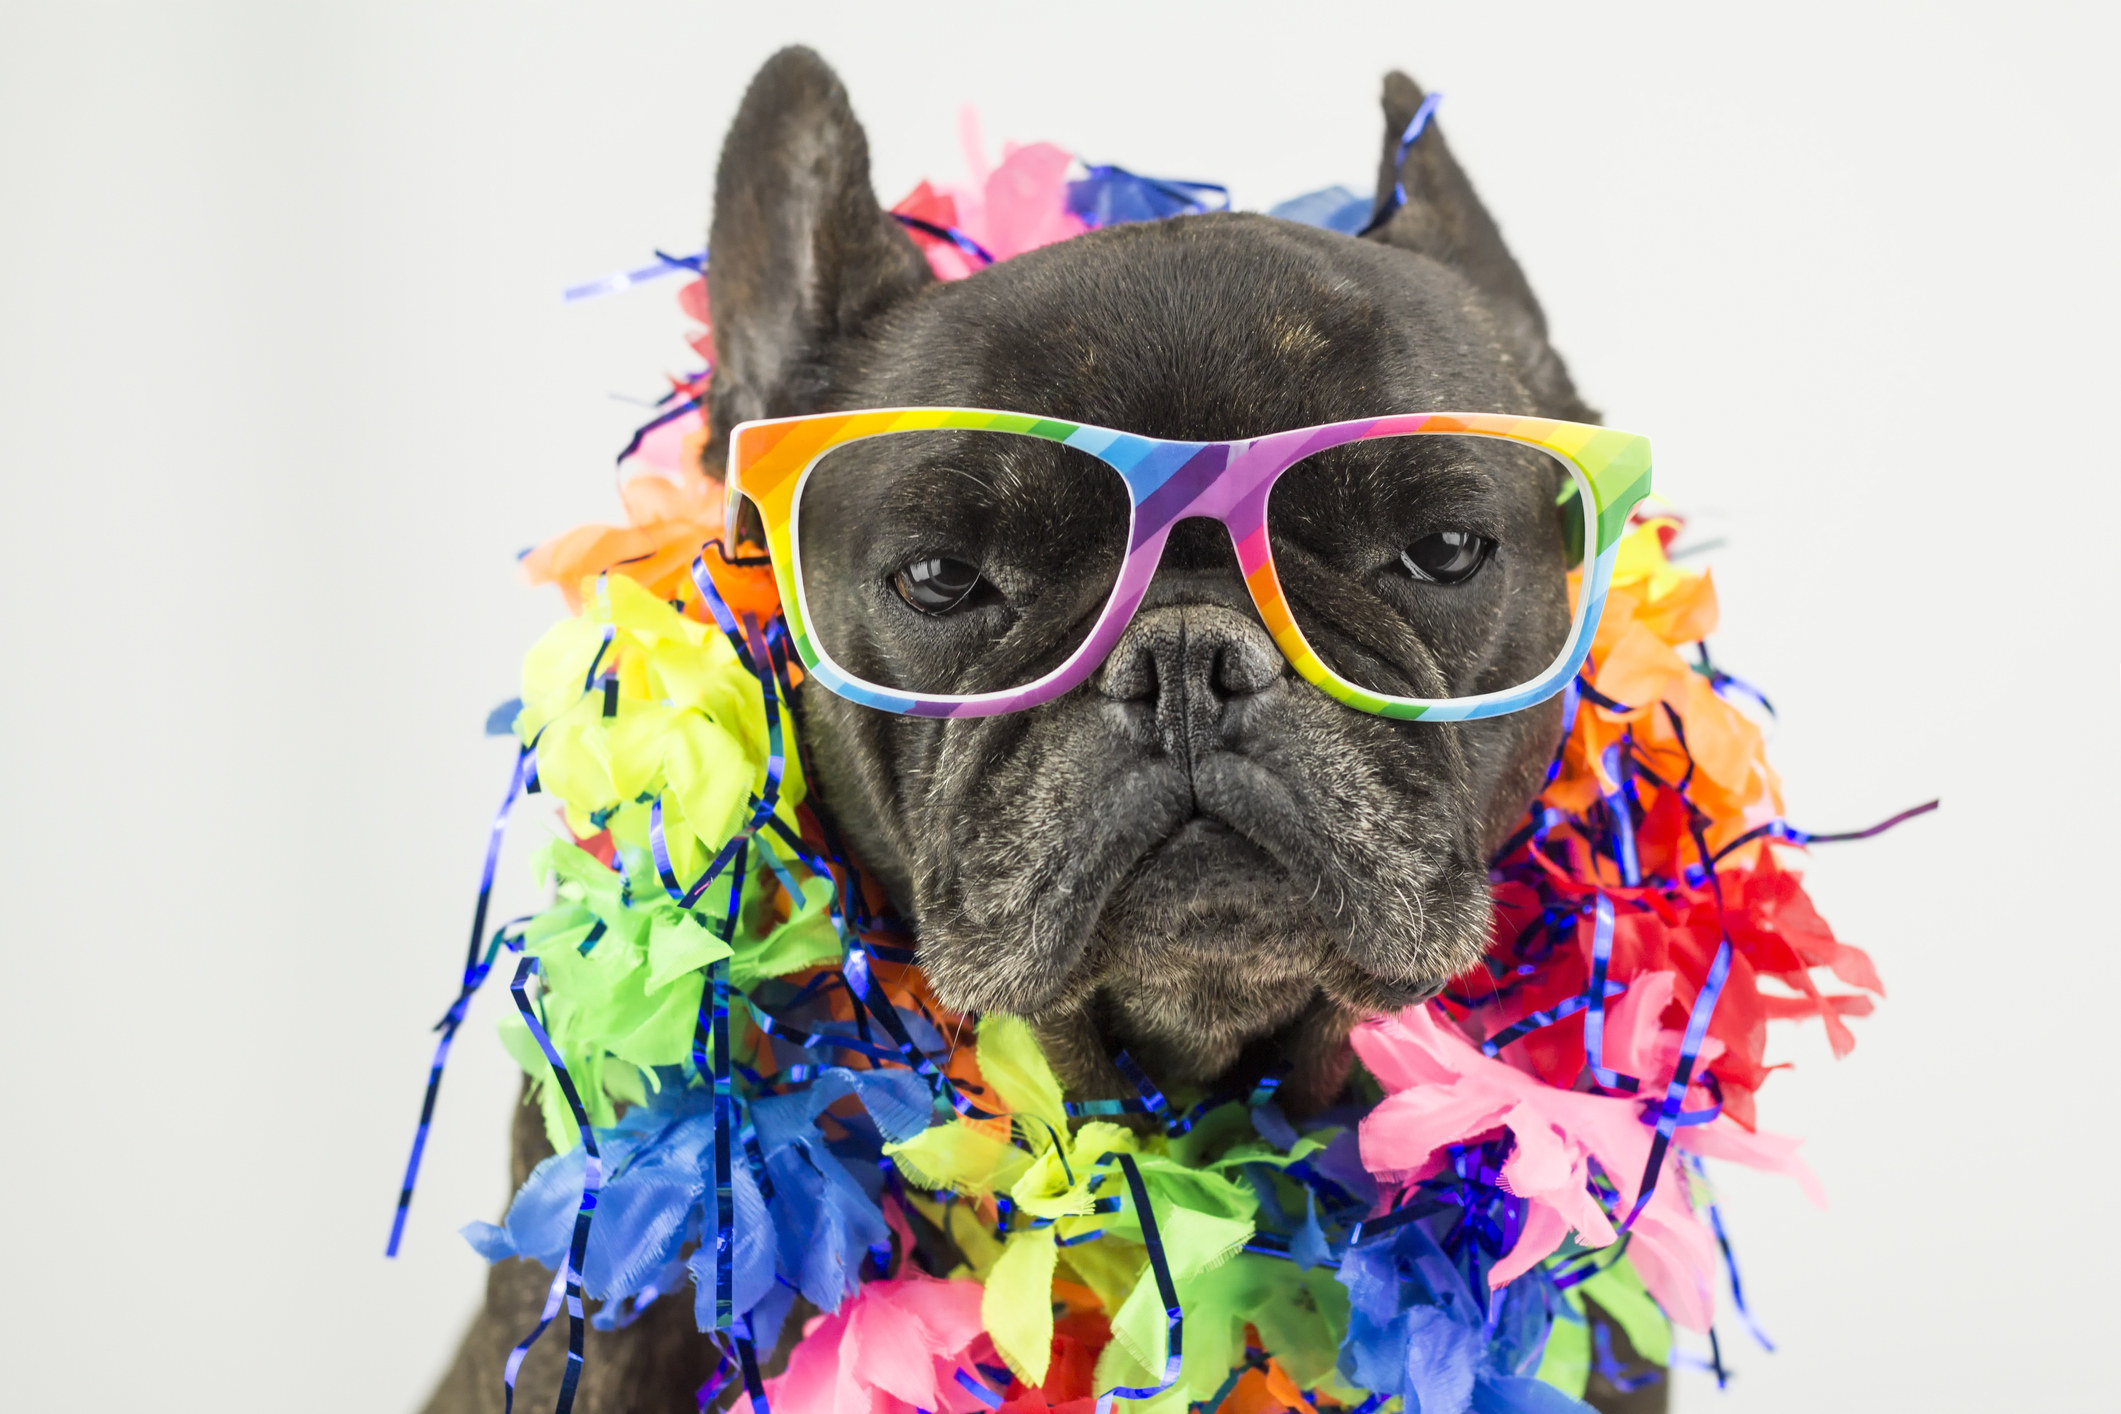 Pug-type dog wearing sunglasses and a &quot;wreath&quot; in rainbow colors